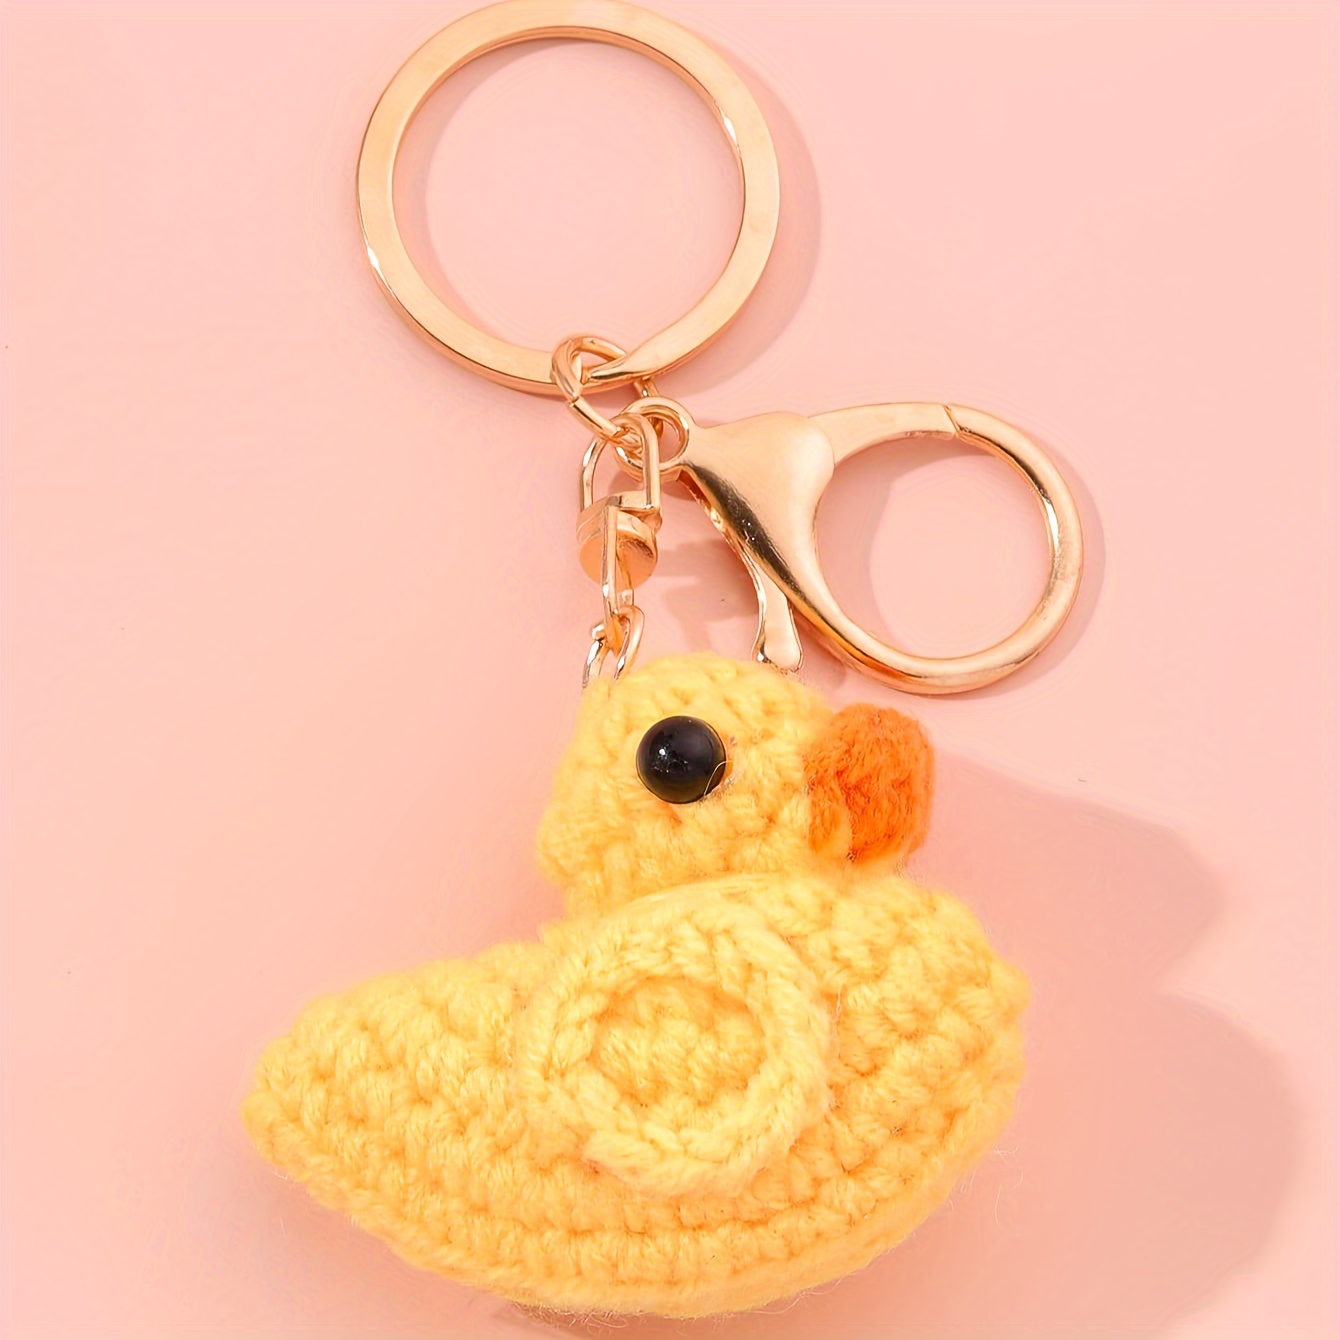 

Crochet Duck Keychain Cute Weaving Animal Key Chain Ring Purse Bag Backpack Charm Car Pendant Earbud Case Cover Accessories Gift